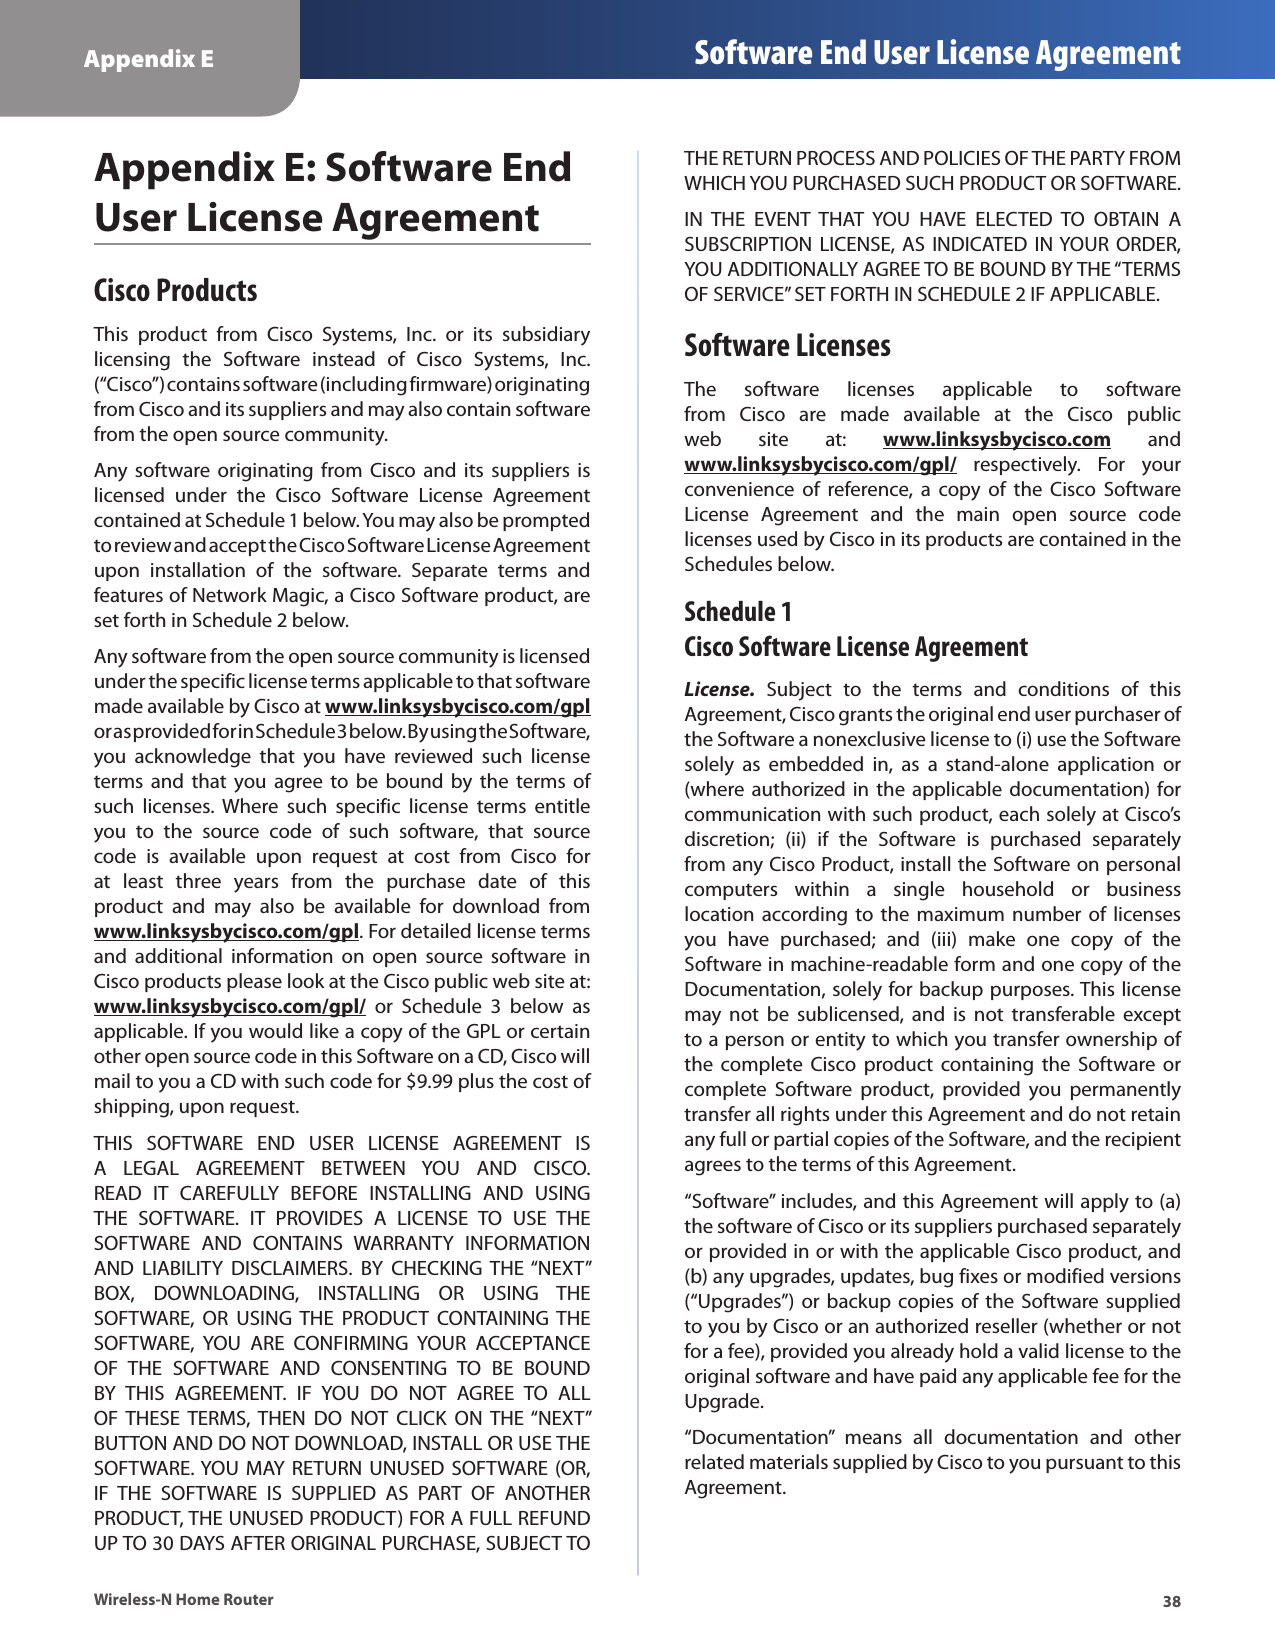 38Appendix E Software End User License AgreementWireless-N Home RouterAppendix E: Software End User License AgreementCisco ProductsThis  product  from  Cisco  Systems,  Inc.  or  its  subsidiary licensing  the  Software  instead  of  Cisco  Systems,  Inc. (“Cisco”) contains software (including firmware) originating from Cisco and its suppliers and may also contain software from the open source community. Any software  originating  from  Cisco  and  its  suppliers  is licensed  under  the  Cisco  Software  License  Agreement contained at Schedule 1 below. You may also be prompted to review and accept the Cisco Software License Agreement upon  installation  of  the  software.  Separate  terms  and features of Network Magic, a Cisco Software product, are set forth in Schedule 2 below. Any software from the open source community is licensed under the specific license terms applicable to that software made available by Cisco at www.linksysbycisco.com/gpl or as provided for in Schedule 3 below. By using the Software, you  acknowledge  that  you  have  reviewed  such  license terms  and  that  you agree  to  be  bound  by  the  terms  of such  licenses.  Where  such  specific  license  terms  entitle you  to  the  source  code  of  such  software,  that  source code  is  available  upon  request  at  cost  from  Cisco  for at  least  three  years  from  the  purchase  date  of  this product  and  may  also  be  available  for  download  from www.linksysbycisco.com/gpl. For detailed license terms and  additional  information  on  open  source  software  in Cisco products please look at the Cisco public web site at: www.linksysbycisco.com/gpl/  or  Schedule  3  below  as applicable. If you would like a copy of the GPL or certain other open source code in this Software on a CD, Cisco will mail to you a CD with such code for $9.99 plus the cost of shipping, upon request.THIS  SOFTWARE  END  USER  LICENSE  AGREEMENT  IS A  LEGAL  AGREEMENT  BETWEEN  YOU  AND  CISCO. READ  IT  CAREFULLY  BEFORE  INSTALLING  AND  USING THE  SOFTWARE.  IT  PROVIDES  A  LICENSE  TO  USE  THE SOFTWARE  AND  CONTAINS  WARRANTY  INFORMATION AND  LIABILITY  DISCLAIMERS.  BY  CHECKING  THE “NEXT” BOX,  DOWNLOADING,  INSTALLING  OR  USING  THE SOFTWARE,  OR  USING  THE  PRODUCT  CONTAINING  THE SOFTWARE,  YOU  ARE  CONFIRMING  YOUR  ACCEPTANCE OF  THE  SOFTWARE  AND  CONSENTING  TO  BE  BOUND BY  THIS  AGREEMENT.  IF  YOU  DO  NOT  AGREE  TO  ALL OF  THESE  TERMS,  THEN  DO  NOT  CLICK  ON THE “NEXT” BUTTON AND DO NOT DOWNLOAD, INSTALL OR USE THE SOFTWARE. YOU MAY  RETURN  UNUSED  SOFTWARE  (OR, IF  THE  SOFTWARE  IS  SUPPLIED  AS  PART  OF  ANOTHER PRODUCT, THE UNUSED PRODUCT) FOR A FULL REFUND UP TO 30 DAYS AFTER ORIGINAL PURCHASE, SUBJECT TO THE RETURN PROCESS AND POLICIES OF THE PARTY FROM WHICH YOU PURCHASED SUCH PRODUCT OR SOFTWARE.IN  THE  EVENT  THAT  YOU  HAVE  ELECTED  TO  OBTAIN  A SUBSCRIPTION LICENSE,  AS  INDICATED  IN YOUR ORDER, YOU ADDITIONALLY AGREE TO BE BOUND BY THE “TERMS OF SERVICE” SET FORTH IN SCHEDULE 2 IF APPLICABLE.Software LicensesThe  software  licenses  applicable  to  software from  Cisco  are  made  available  at  the  Cisco  public web  site  at:  www.linksysbycisco.com  and www.linksysbycisco.com/gpl/  respectively.  For  your convenience  of  reference,  a  copy  of  the  Cisco  Software License  Agreement  and  the  main  open  source  code licenses used by Cisco in its products are contained in the Schedules below.Schedule 1 Cisco Software License AgreementLicense.  Subject  to  the  terms  and  conditions  of  this Agreement, Cisco grants the original end user purchaser of the Software a nonexclusive license to (i) use the Software solely  as  embedded  in,  as  a  stand-alone  application  or (where authorized in  the  applicable documentation) for communication with such product, each solely at Cisco’s discretion;  (ii)  if  the  Software  is  purchased  separately from any Cisco Product, install the Software on personal computers  within  a  single  household  or  business location according to the  maximum number  of  licenses you  have  purchased;  and  (iii)  make  one  copy  of  the Software in machine-readable form and one copy of the Documentation, solely for backup purposes. This license may  not  be  sublicensed,  and  is  not  transferable  except to a person or entity to which you transfer ownership of the  complete Cisco  product  containing the  Software or complete  Software  product,  provided  you  permanently transfer all rights under this Agreement and do not retain any full or partial copies of the Software, and the recipient agrees to the terms of this Agreement. “Software” includes, and this Agreement will apply to (a) the software of Cisco or its suppliers purchased separately or provided in or with the applicable Cisco product, and (b) any upgrades, updates, bug fixes or modified versions (“Upgrades”) or backup copies of  the  Software supplied to you by Cisco or an authorized reseller (whether or not for a fee), provided you already hold a valid license to the original software and have paid any applicable fee for the Upgrade. “Documentation”  means  all  documentation  and  other related materials supplied by Cisco to you pursuant to this Agreement.